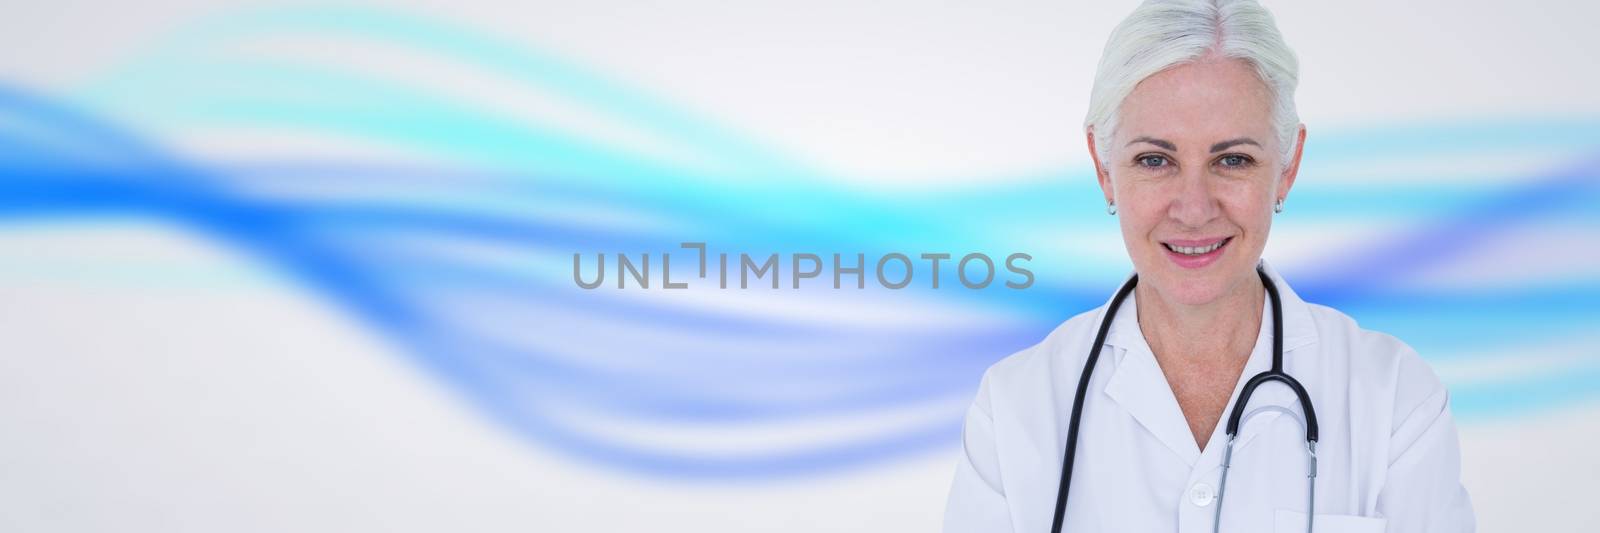 Digital composite of Doctor against blue and white abstract background